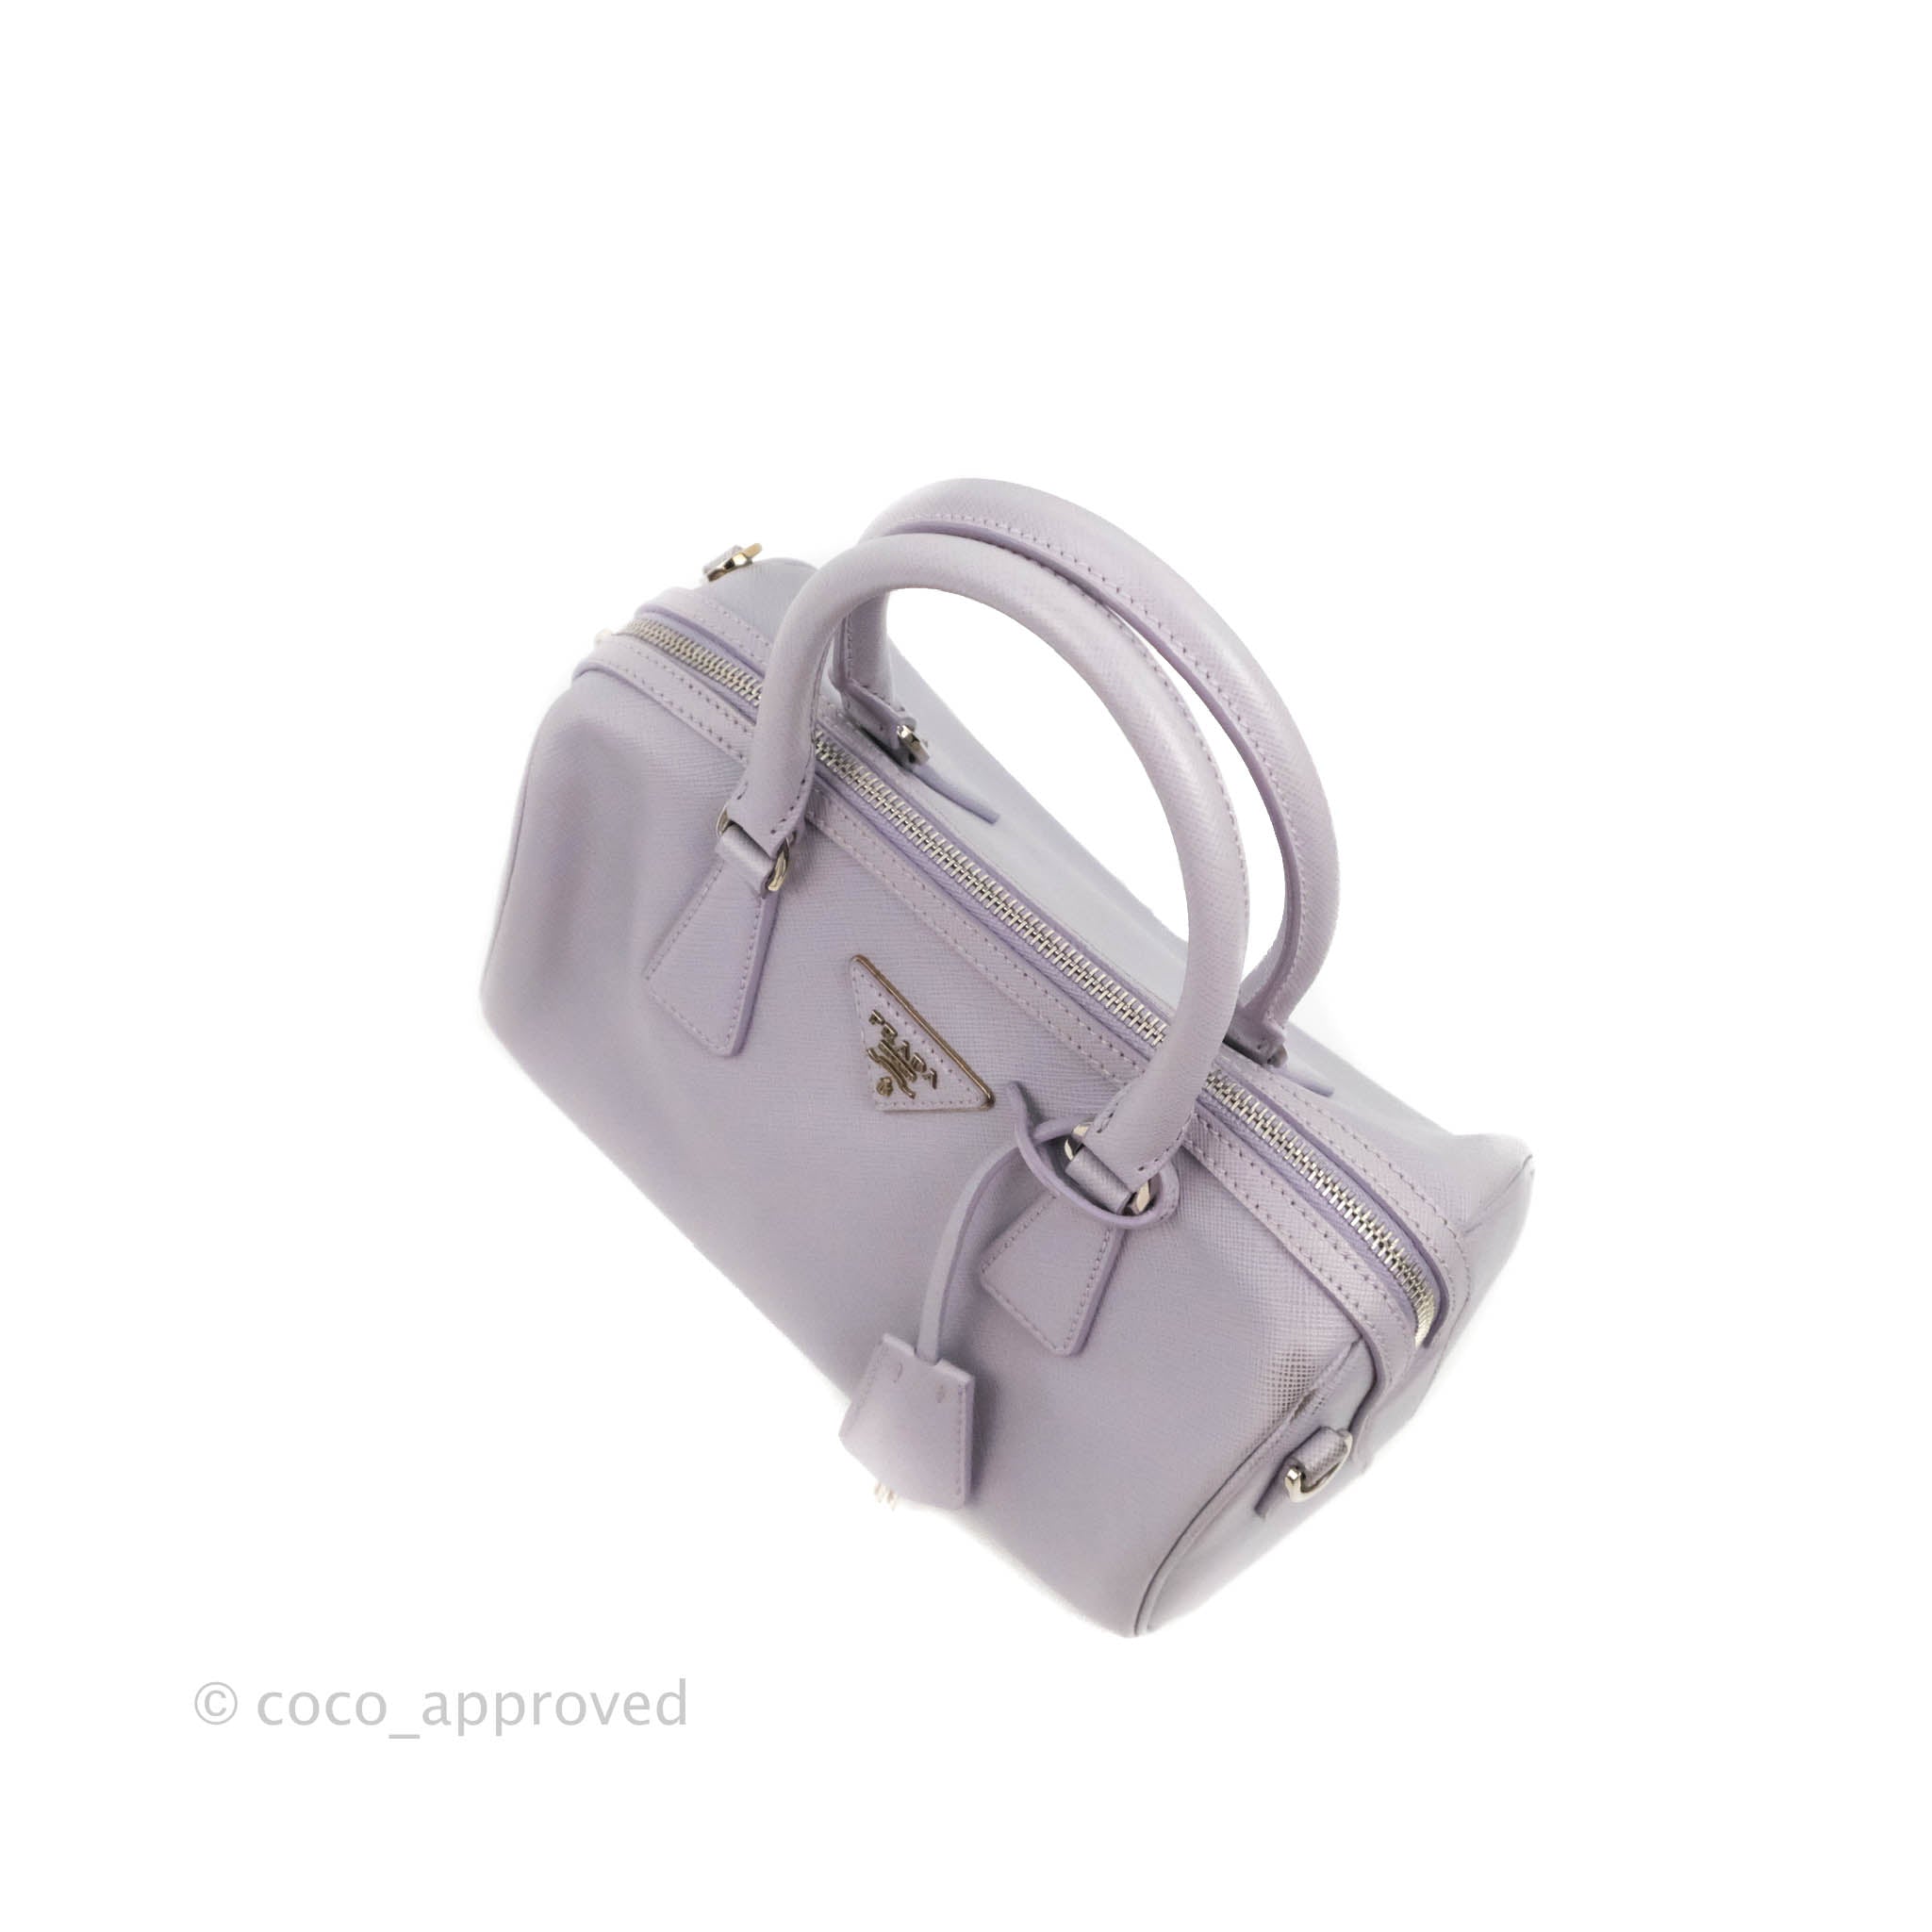 Sold at Auction: Prada Lavender Saffiano Leather Small Bauletto Bag